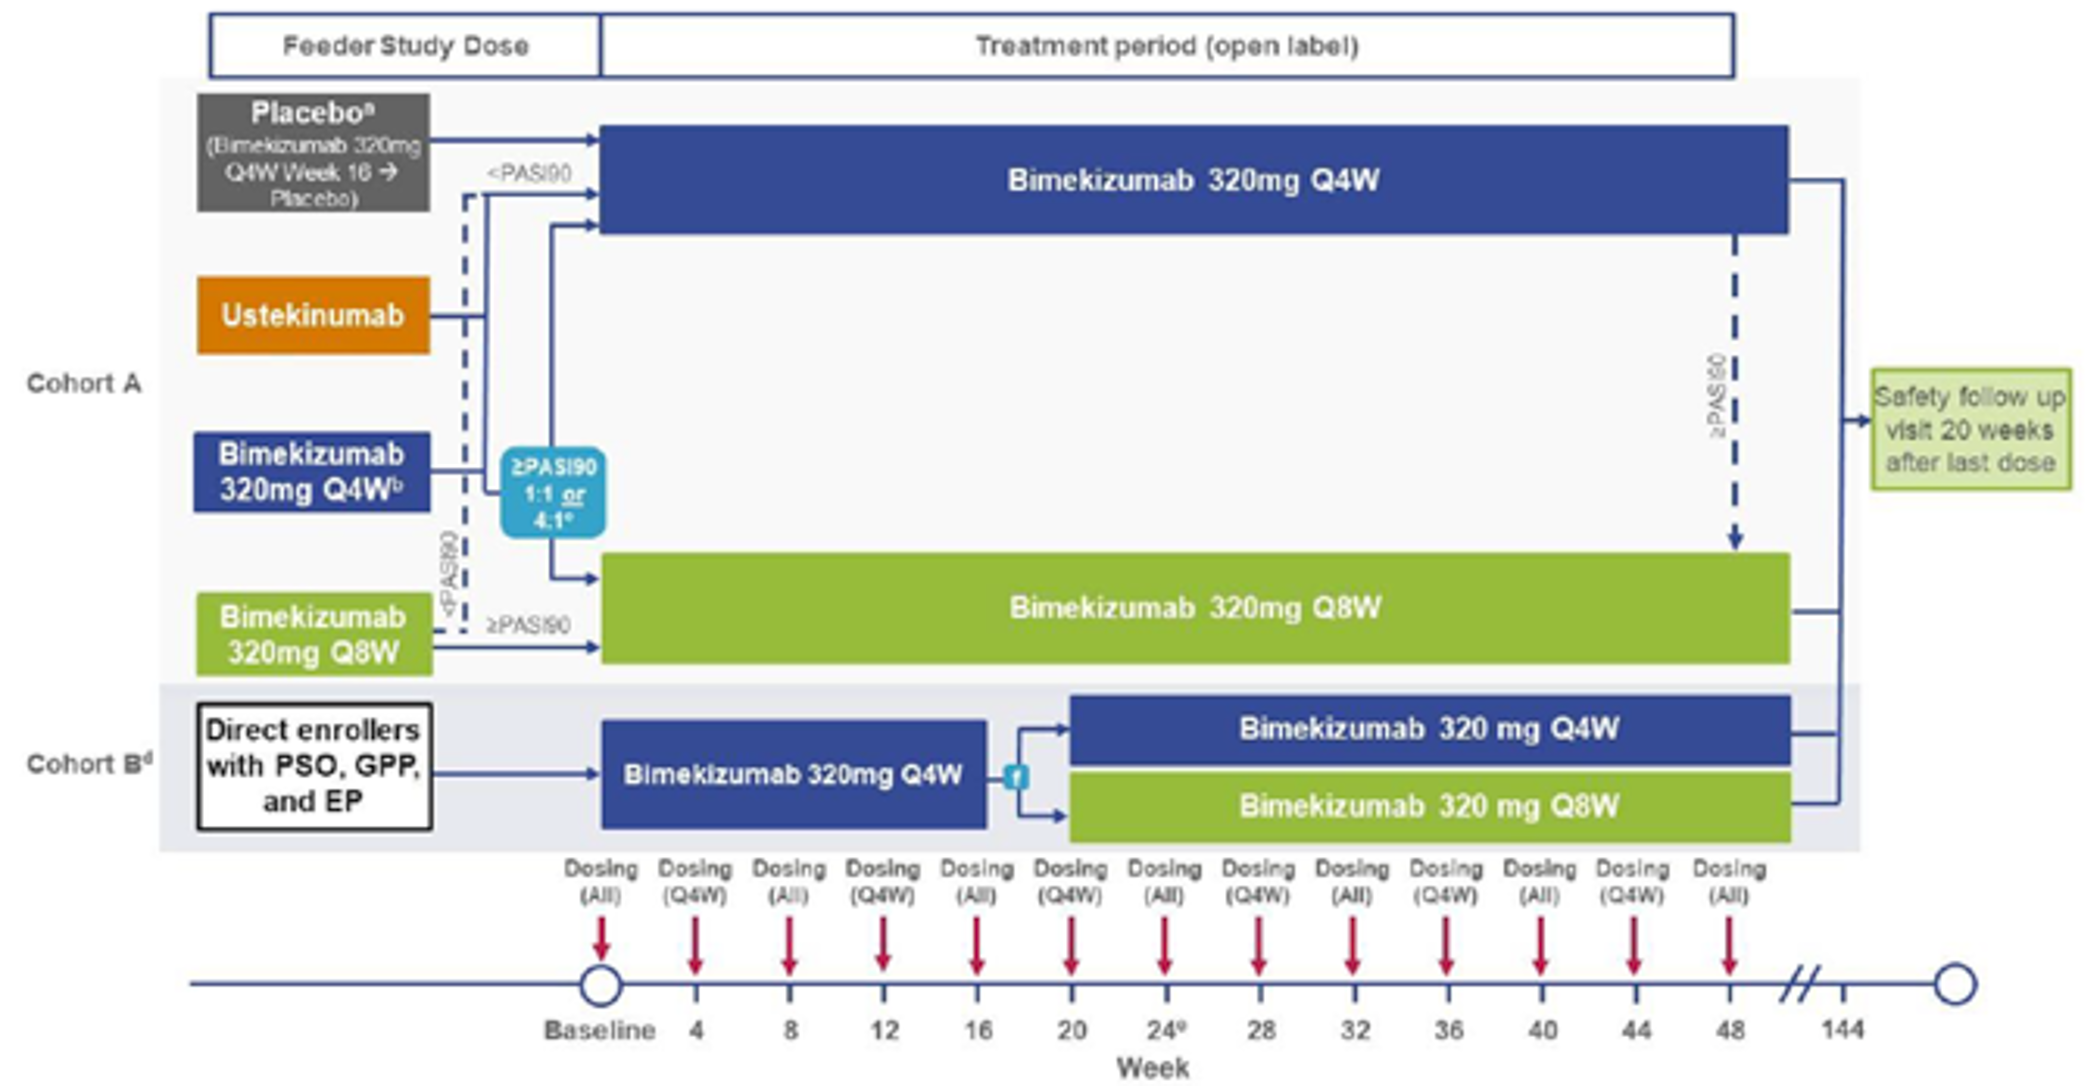 A detailed schematic detailing enrolment in PS0014. Patients who received ustekinumab and achieved PASI 90 at the end of the pivotal study were randomized 1:1 into the bimekizumab 320 mg every 4 weeks or every 8 weeks group, while patients who received bimekizumab 320 mg every 4 weeks and achieved PASI 90 at the end of the pivotal study were randomized 4:1 to the bimekizumab 320 mg every 4 weeks or every 8 weeks group. Patients who received ustekinumab, bimekizumab 320 mg every 4 weeks or bimekizumab 320 mg every 8 weeks and did not achieve PASI 90 at the end of their pivotal trial were allocated to the bimekizumab 320 mg every 4 weeks group. Patients on placebo after a week 16 response (≥ PASI 90) on bimekizumab 320 mg every 4 weeks in PS0013 could enrol in PS0014. Patients on bimekizumab 320 mg every 4 weeks who achieved a PASI 50 response at week 12 in the escape arm of in PS0013 could enrol in PS0014.